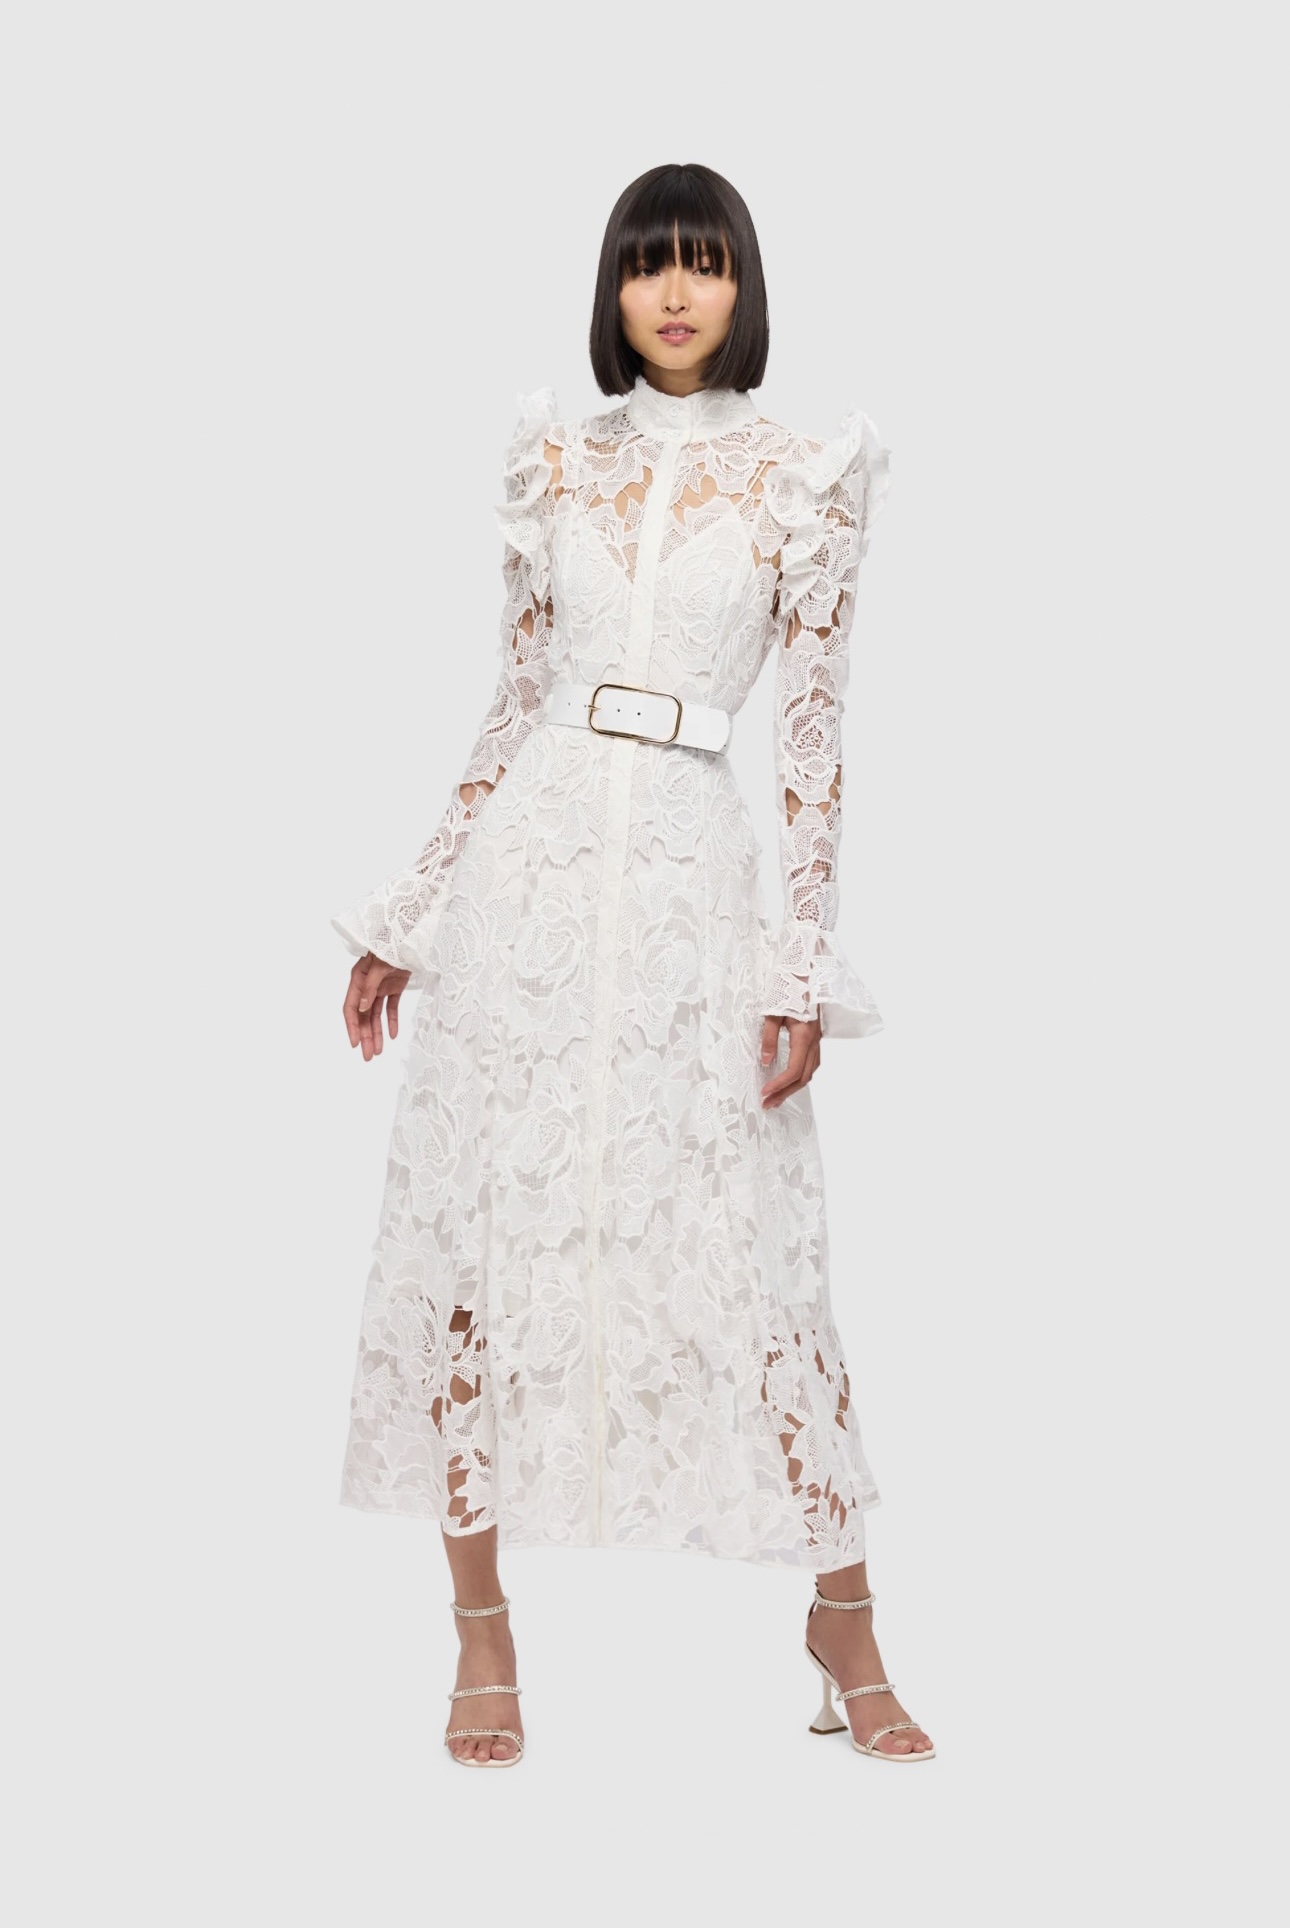 Leo Lin Aliyah Lace Butterfly Sleeve Midi Dress. Leon Lin for rent.